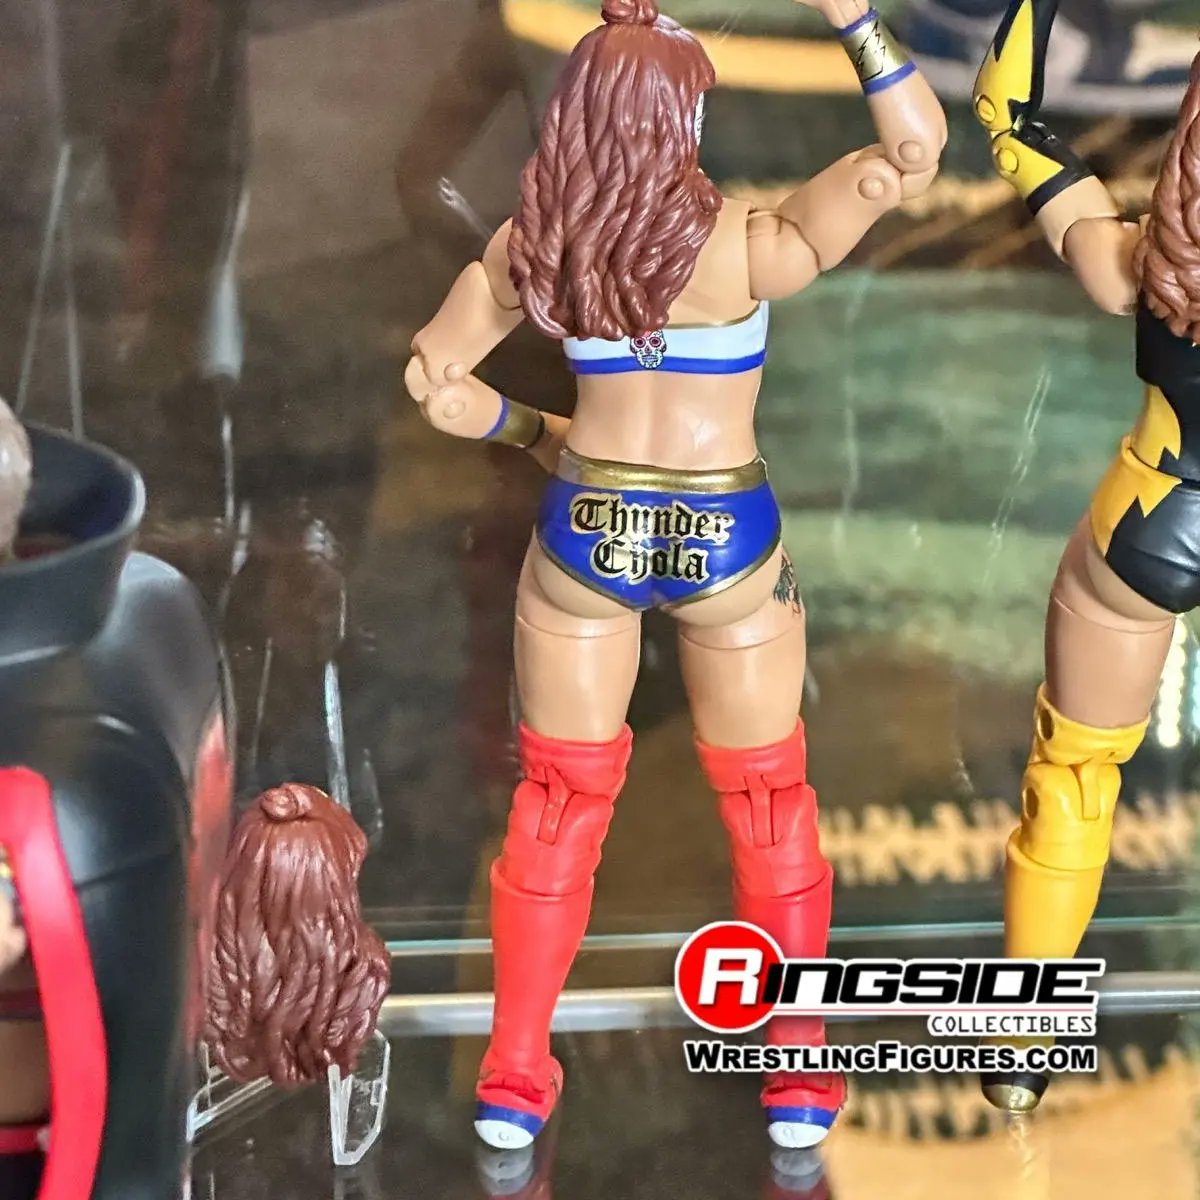 2023 AEW Jazwares Unmatched Collection Series 7 #58 Thunder Rosa [Rare Edition]